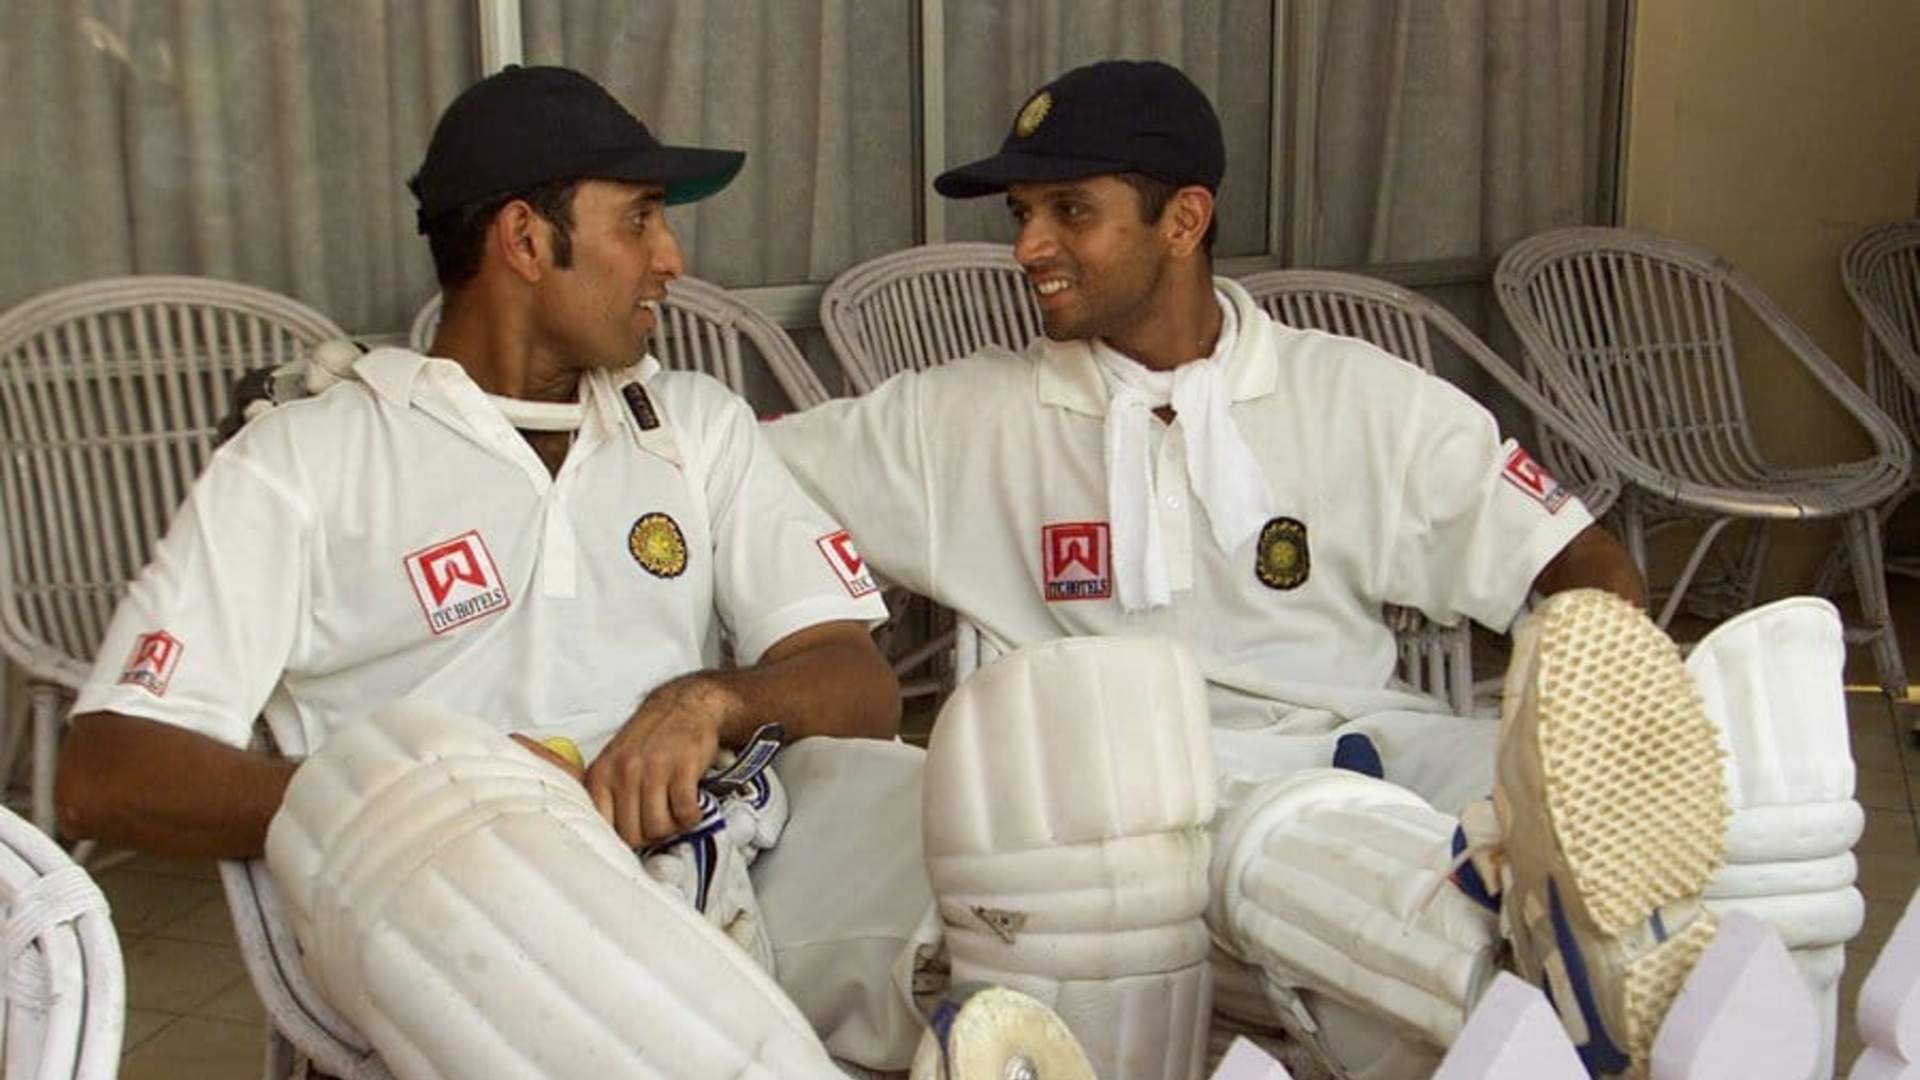 VVS Laxman and Rahul Dravid after they survived ne whole day, Image credit: Facebook/SunRisers Hyderabad